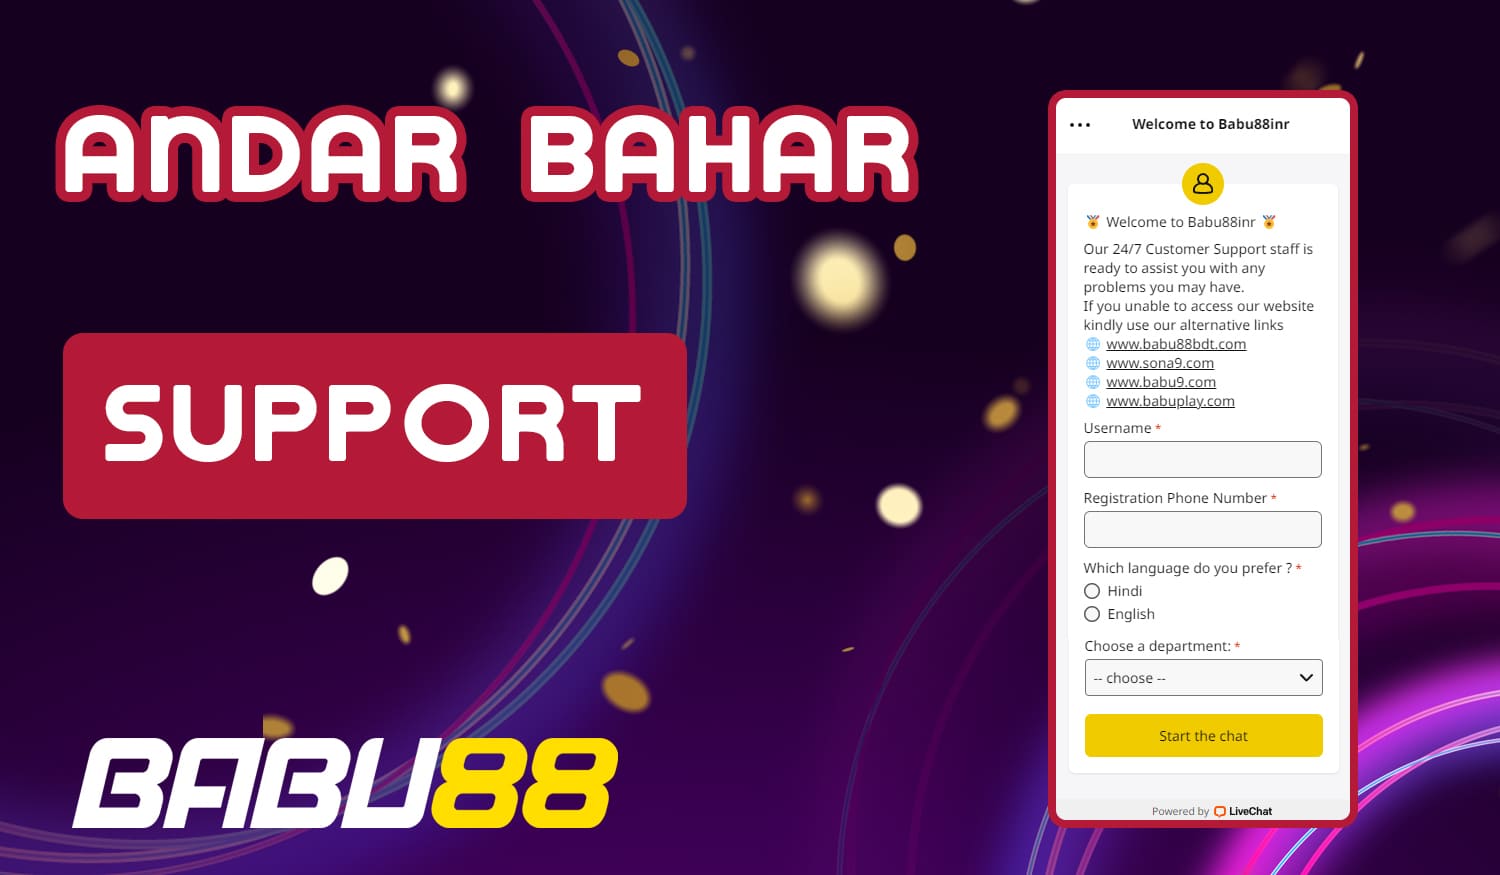 Contact Babu88 support team